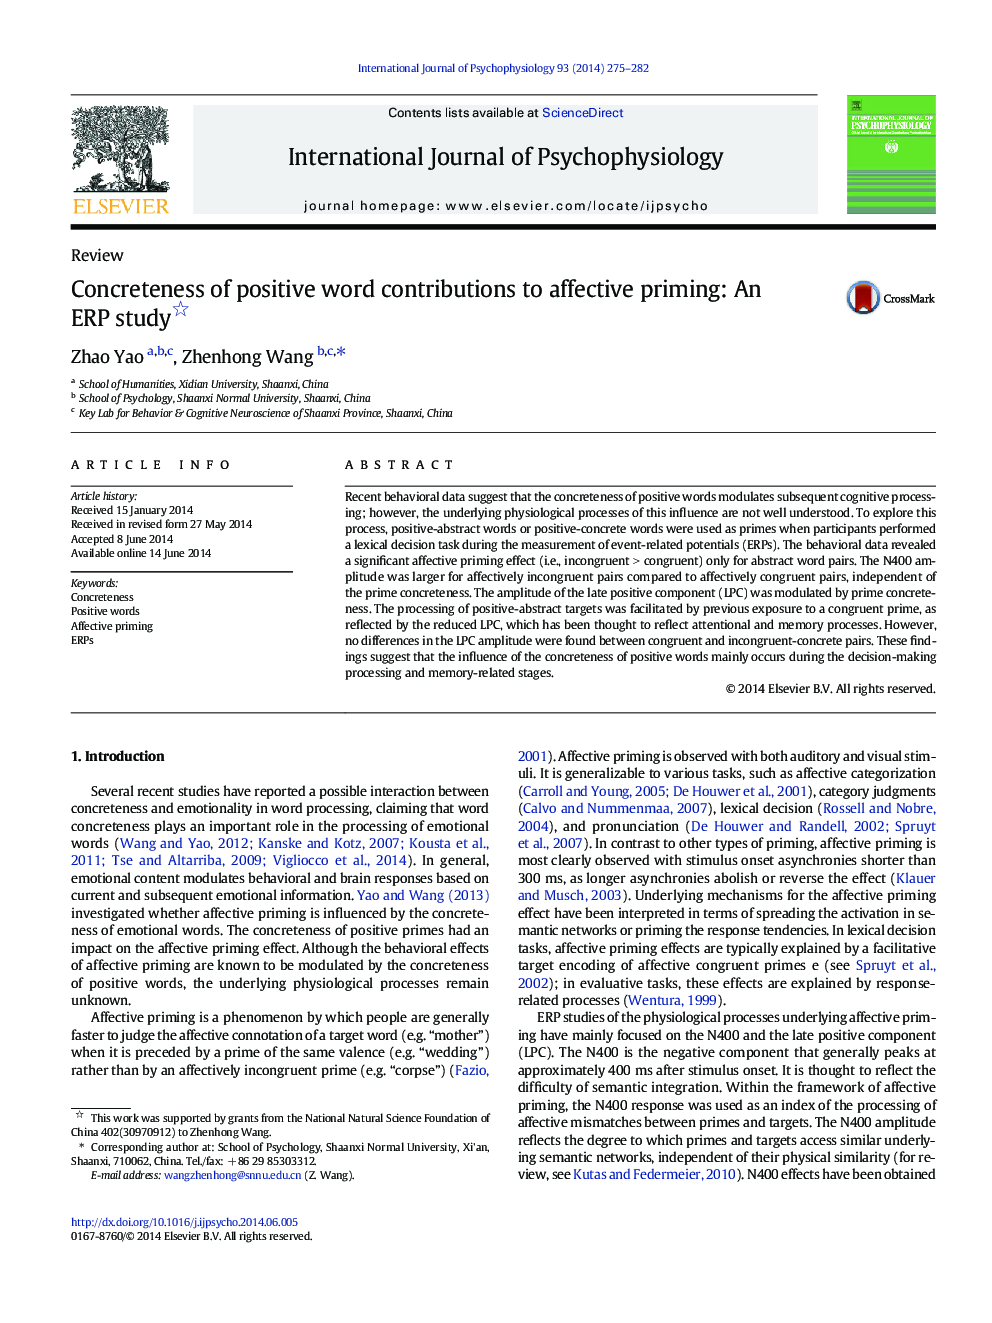 Concreteness of positive word contributions to affective priming: An ERP study 